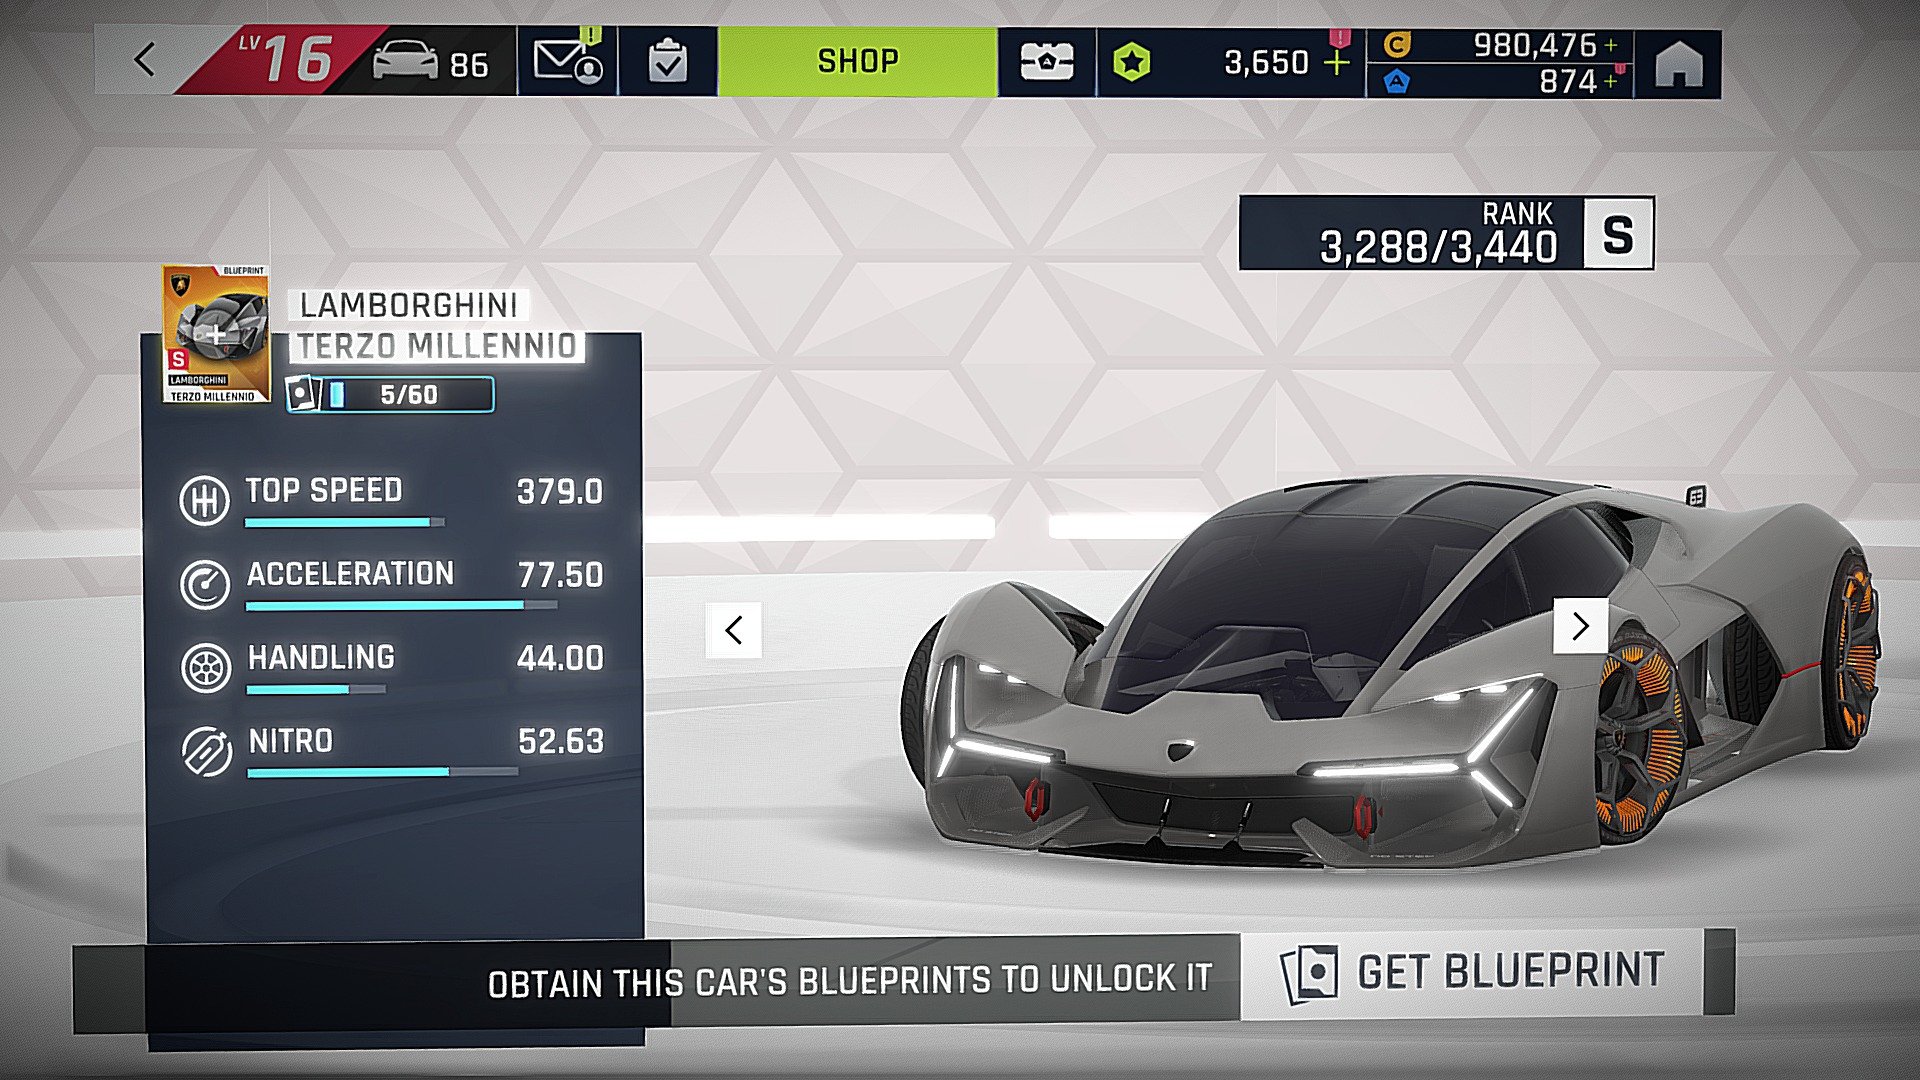 Welcome to Asphalt 9!!

This is what the lamborghini terzo millennio looks like in-game:



More information on A9? Join our Discord server, where you will find all the information about the game, plus lots of help and support!!

https://discord.gg/ymC4JwMtyb

SDC PERFORMANCE™️ - Blender 3.5 - FREE - ASPHALT9 - LAMBORGHINI TERZO MILLENNIO - A9INFOS - Download Free 3D model by SDC PERFORMANCE™️ (@Lambo_SC04) 3d model